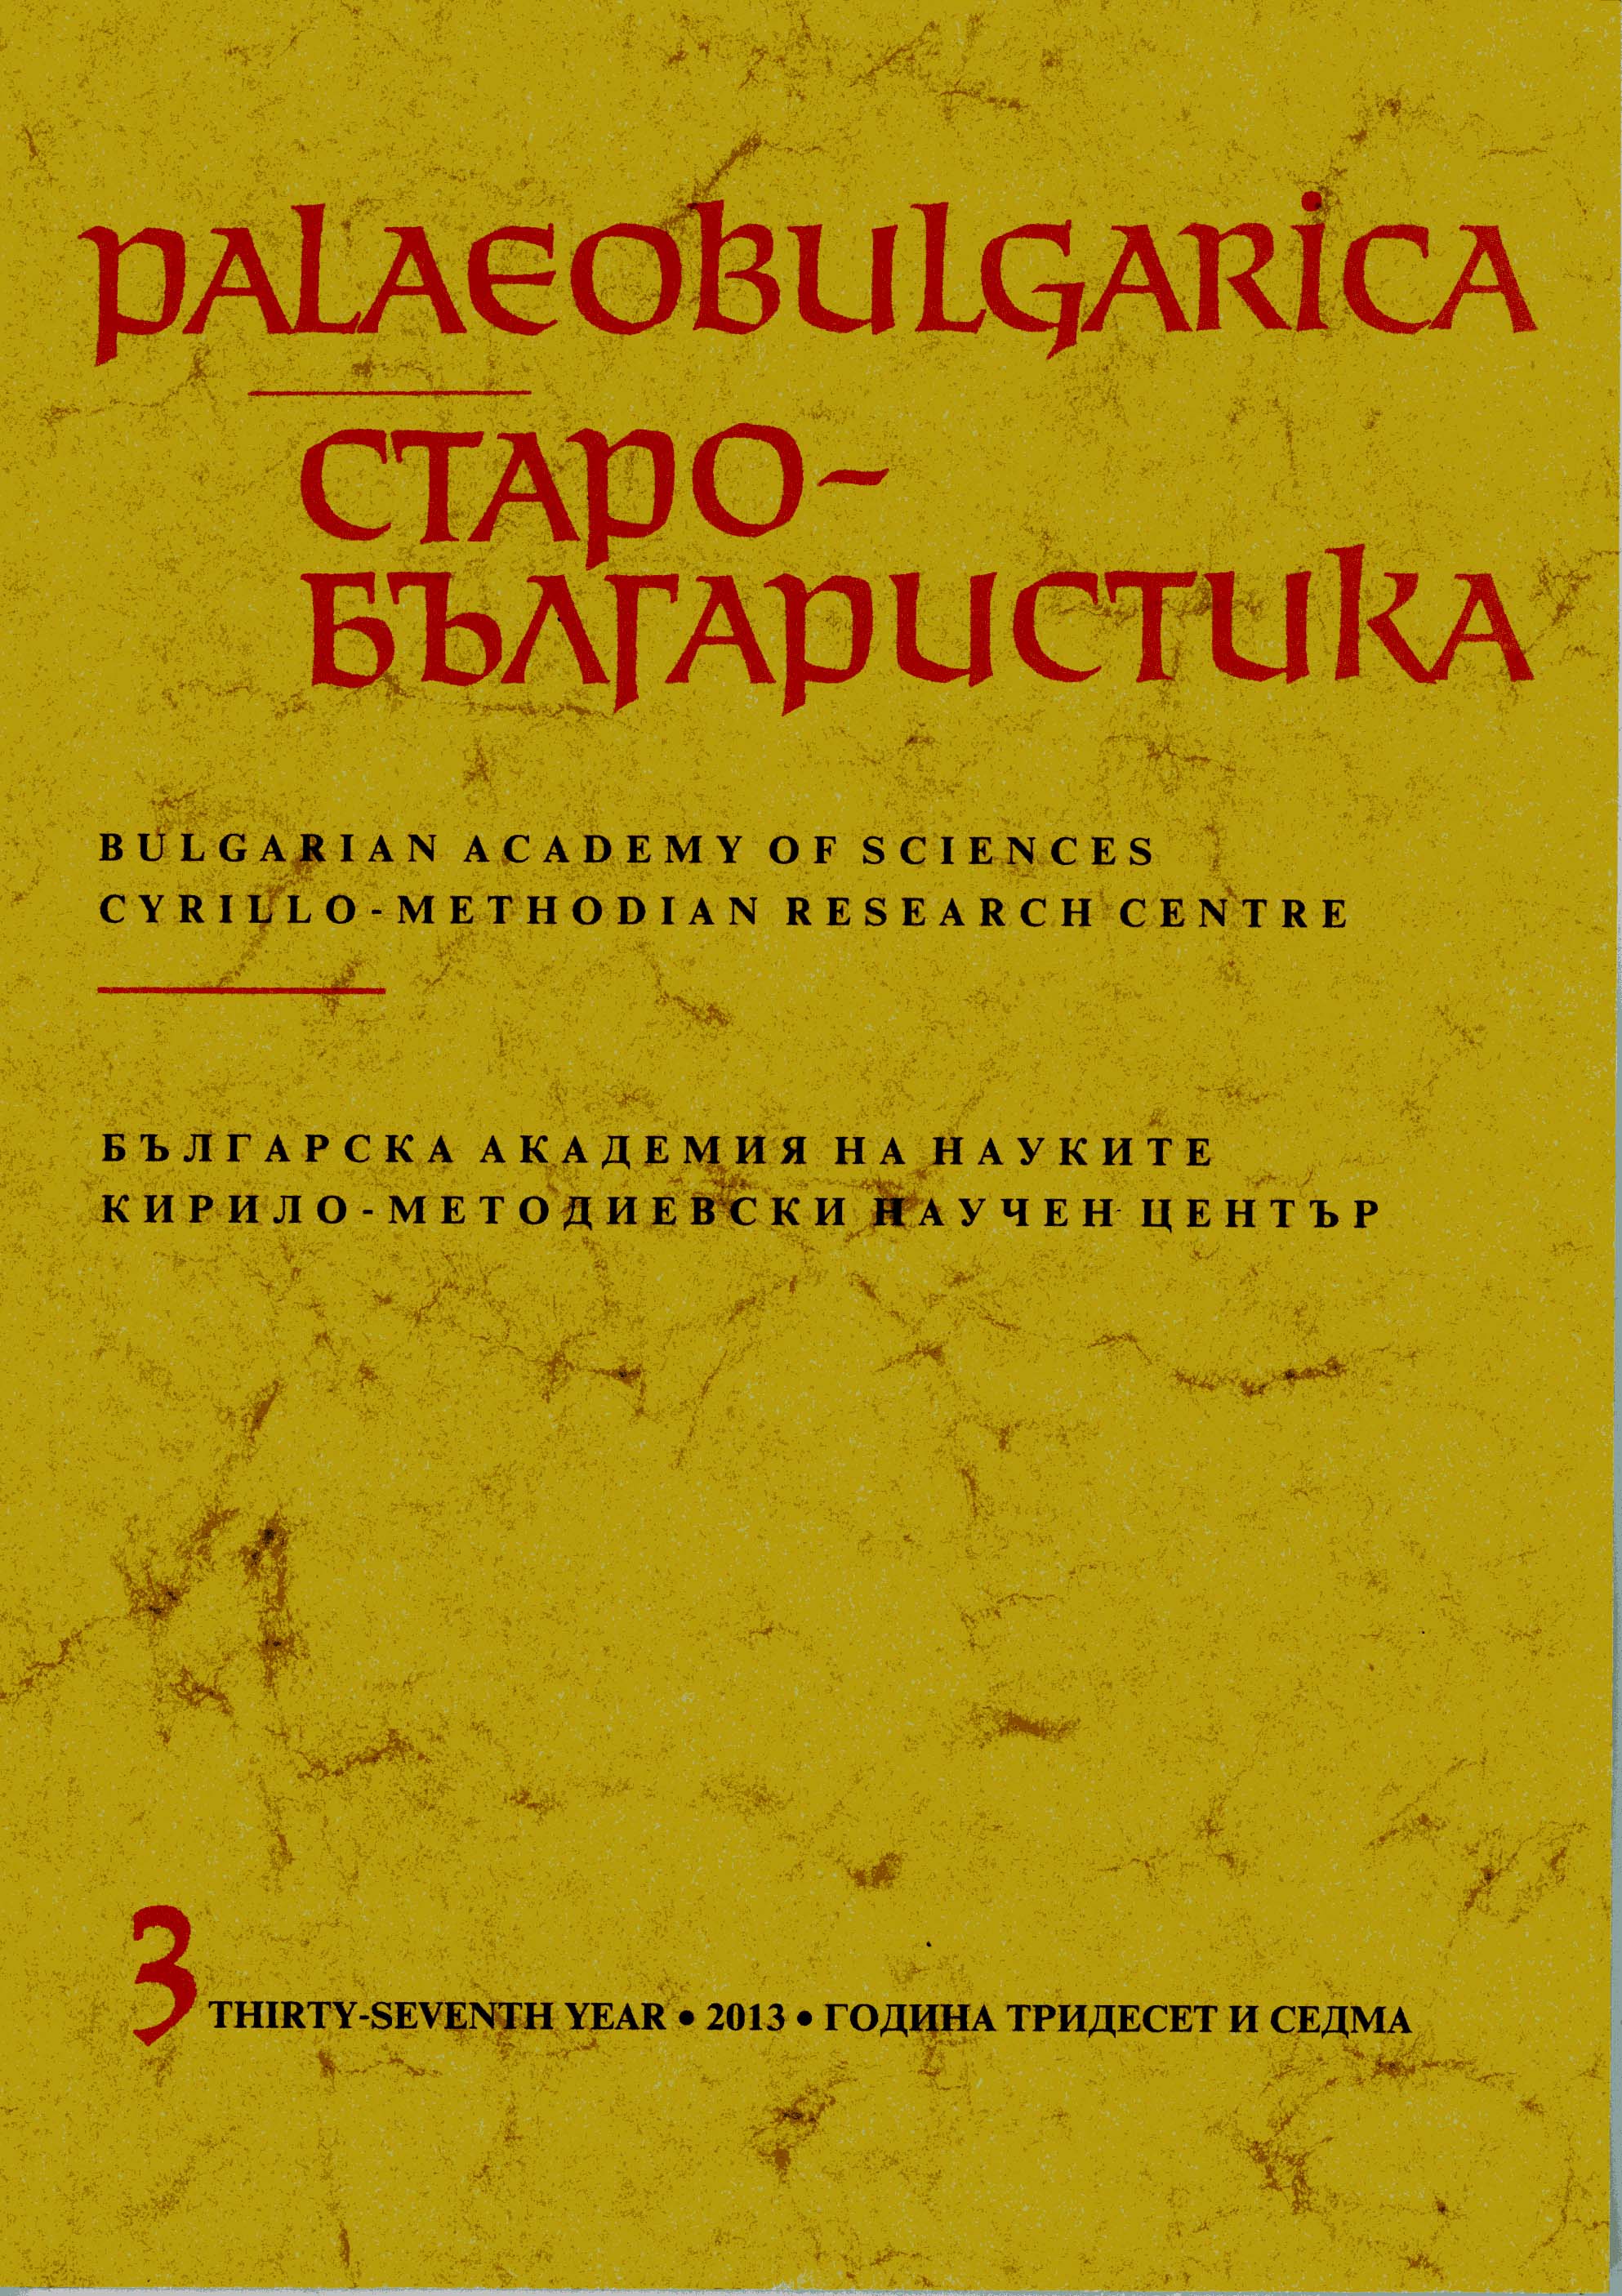 About God's Providence in a Modern Bulgarian Paraphrase of the Medieval Legend about Judas Iscariot Cover Image